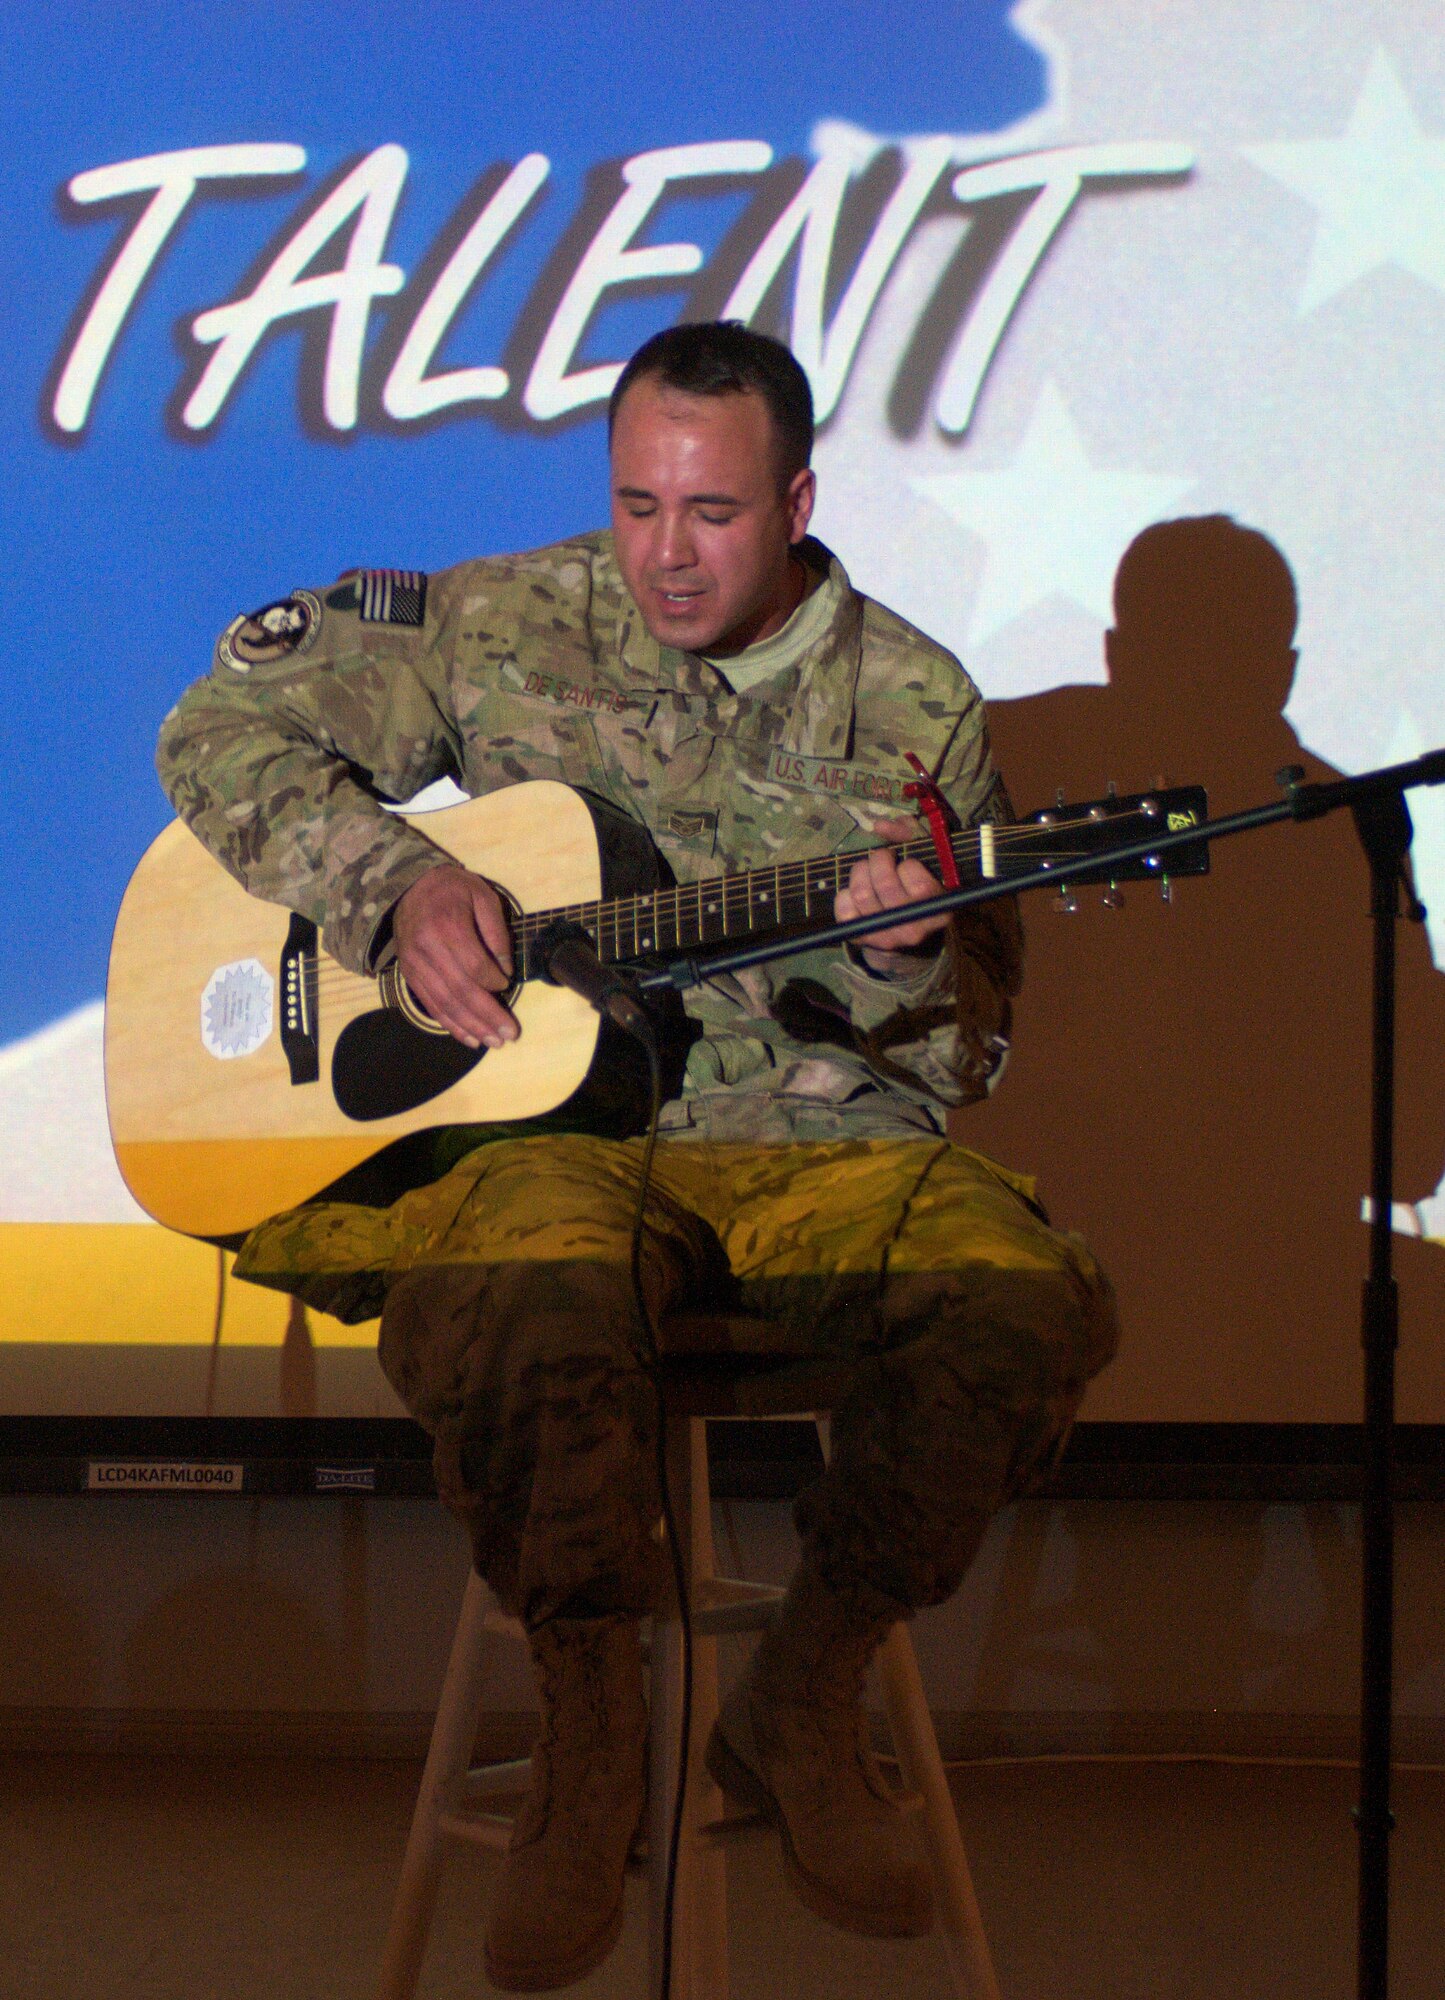 Staff Sgt. Nickolas De Santis, 451st Expeditionary Maintenance Squadron, performs during the Kandahar’s Got Talent competition at Kandahar Air Field April 24. De Santis won the competition, which was organized by the 451st Expeditionary Force Support Flight. (U.S. Air Force photo by Capt. Brian Maguire)